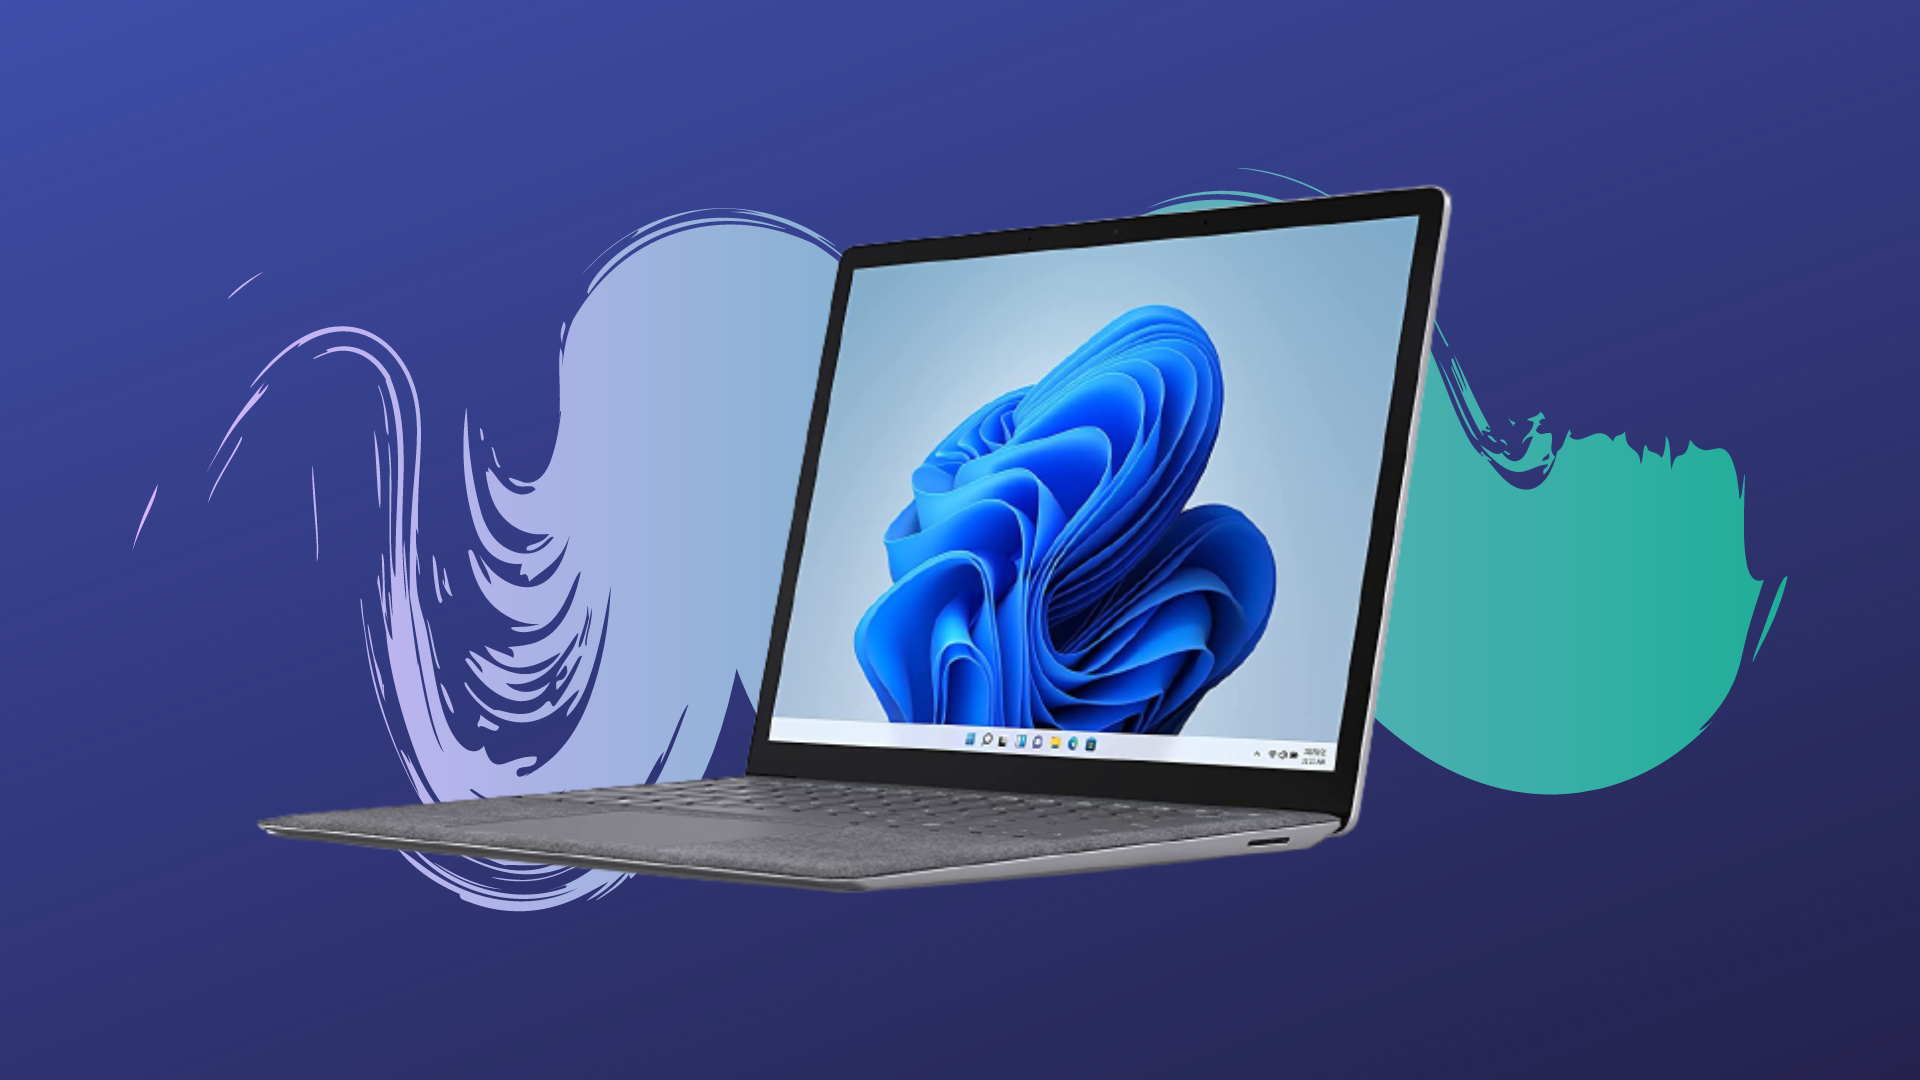 Microsoft Surface Laptop 4 with 13.5-inch touchscreen against a blue background. 